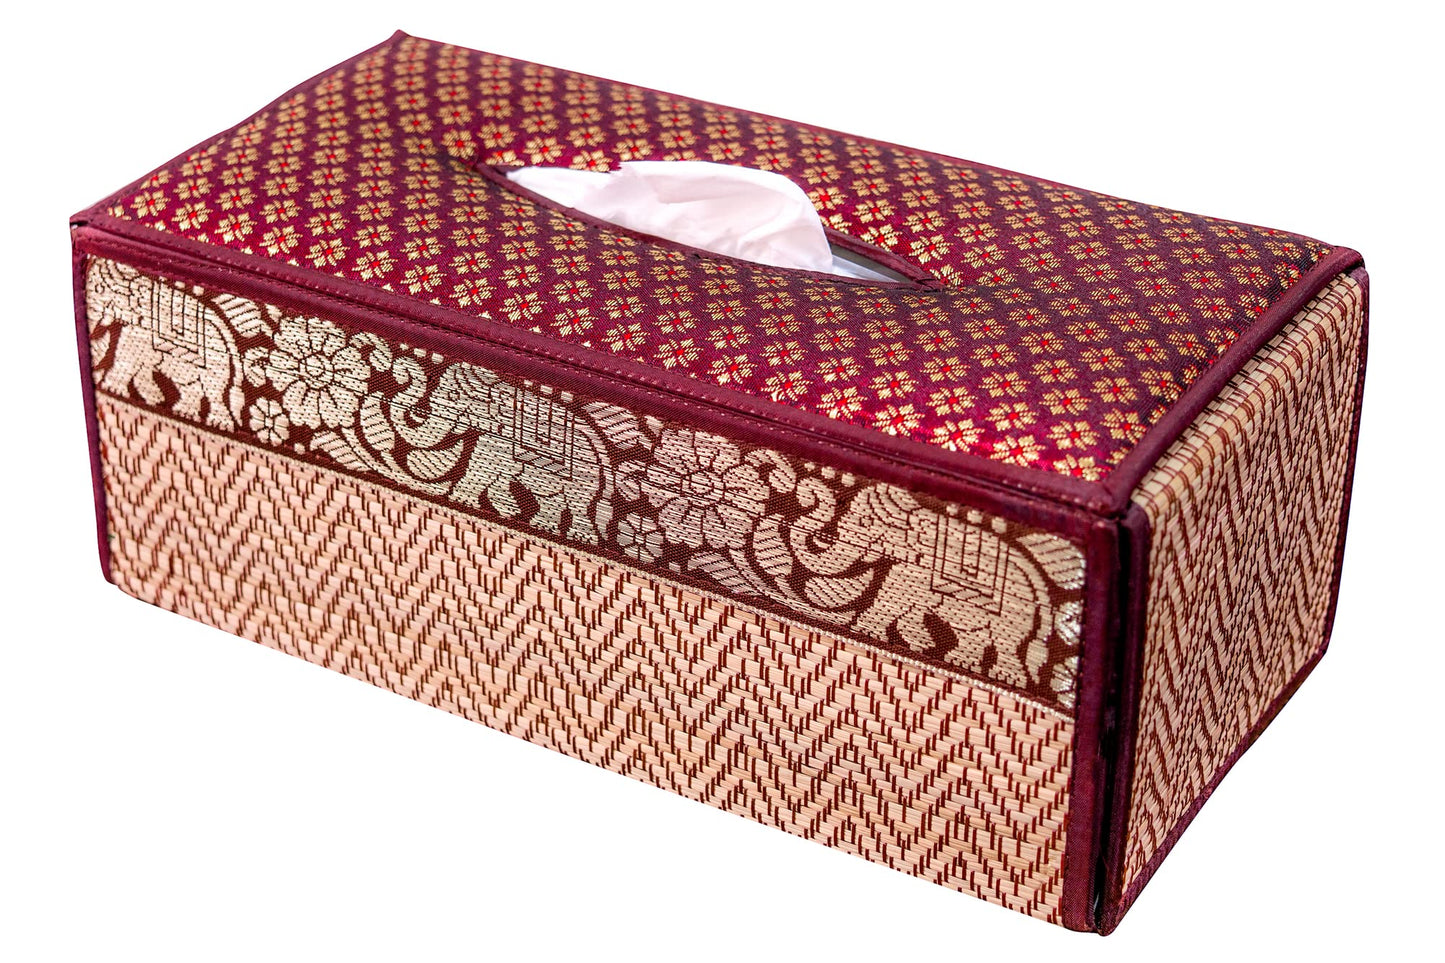 Handmade Reed Tissue Box Cover Case - Eco-Friendly | CCcollections